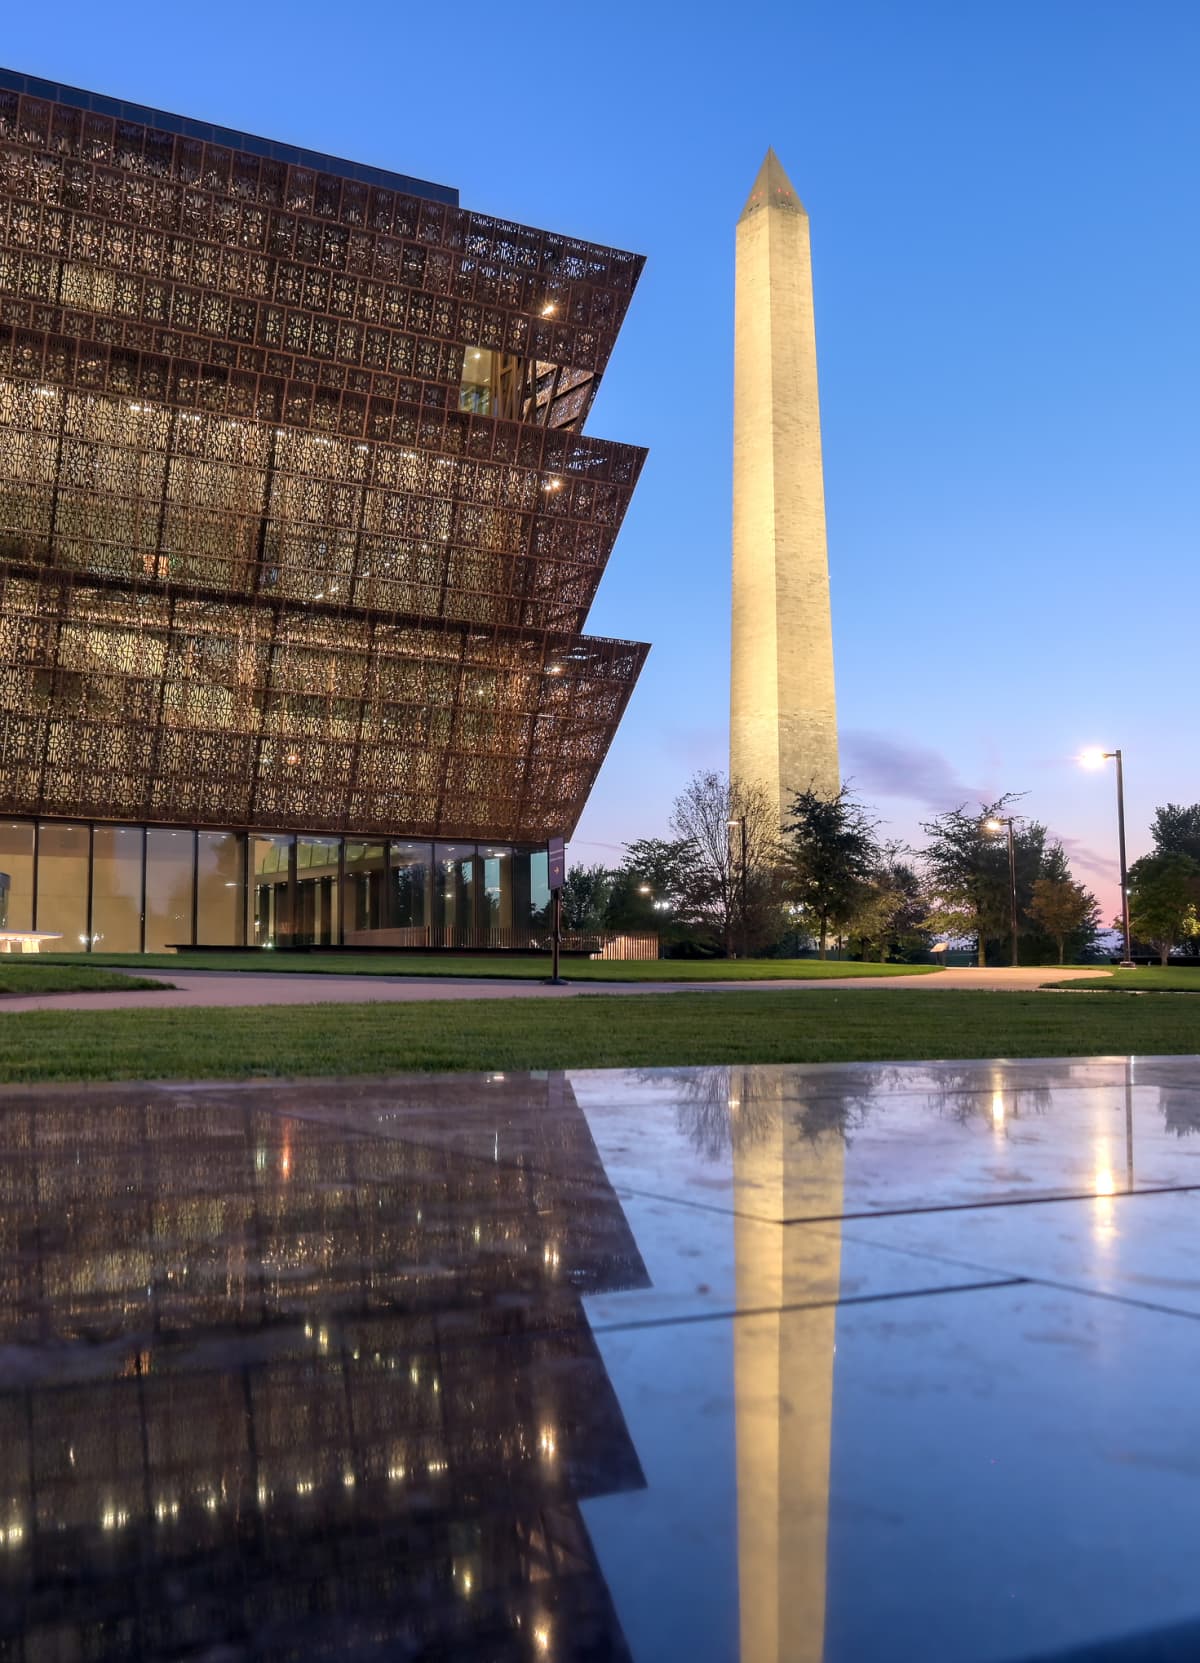 Washington Monument and the African American National Museum